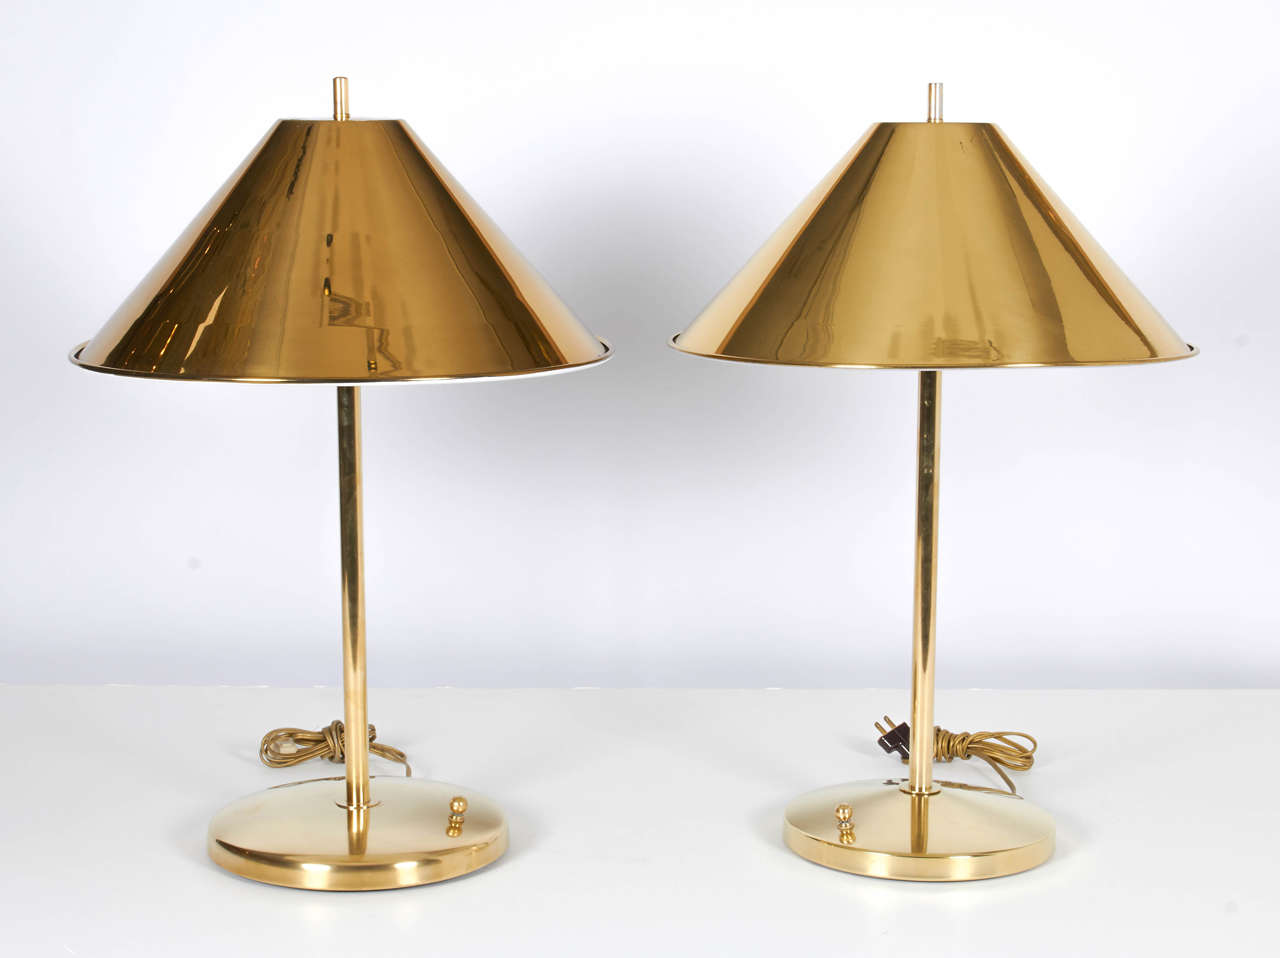 A beautiful and rare pair of brass Nessen lamps with gleaming, polished brass shades. Please note that the bases of the two lamps are slightly different: one base is a little wider than the other; and one base is a little more domed than the other